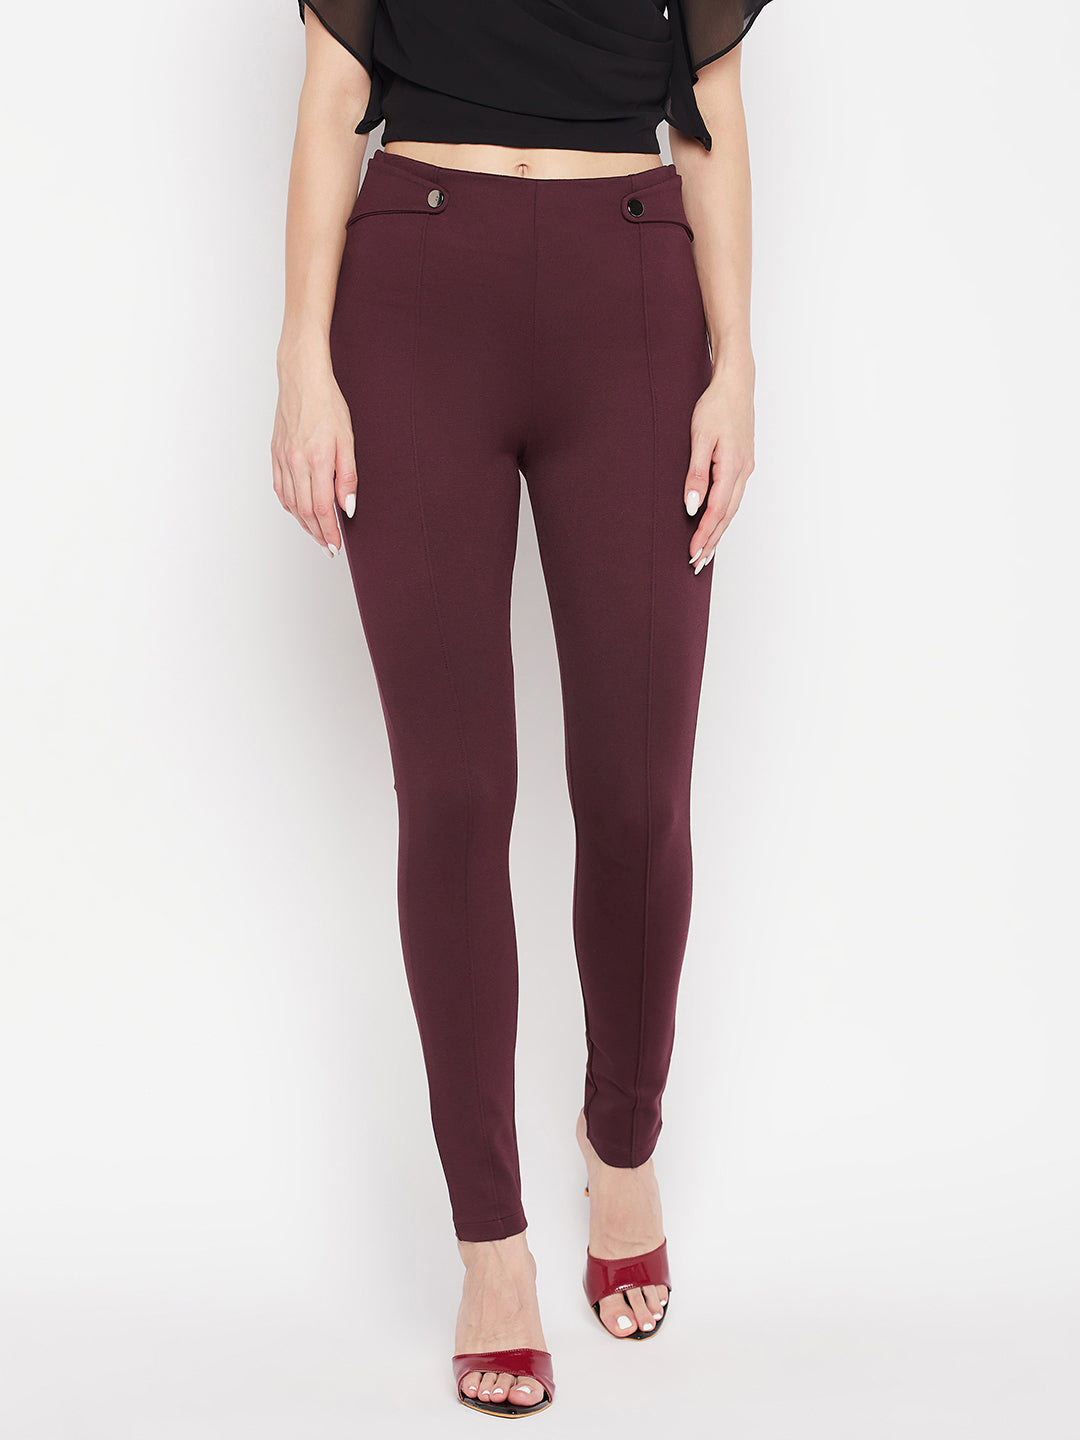 Clora Wine Solid Relaxed Fit Jeggings